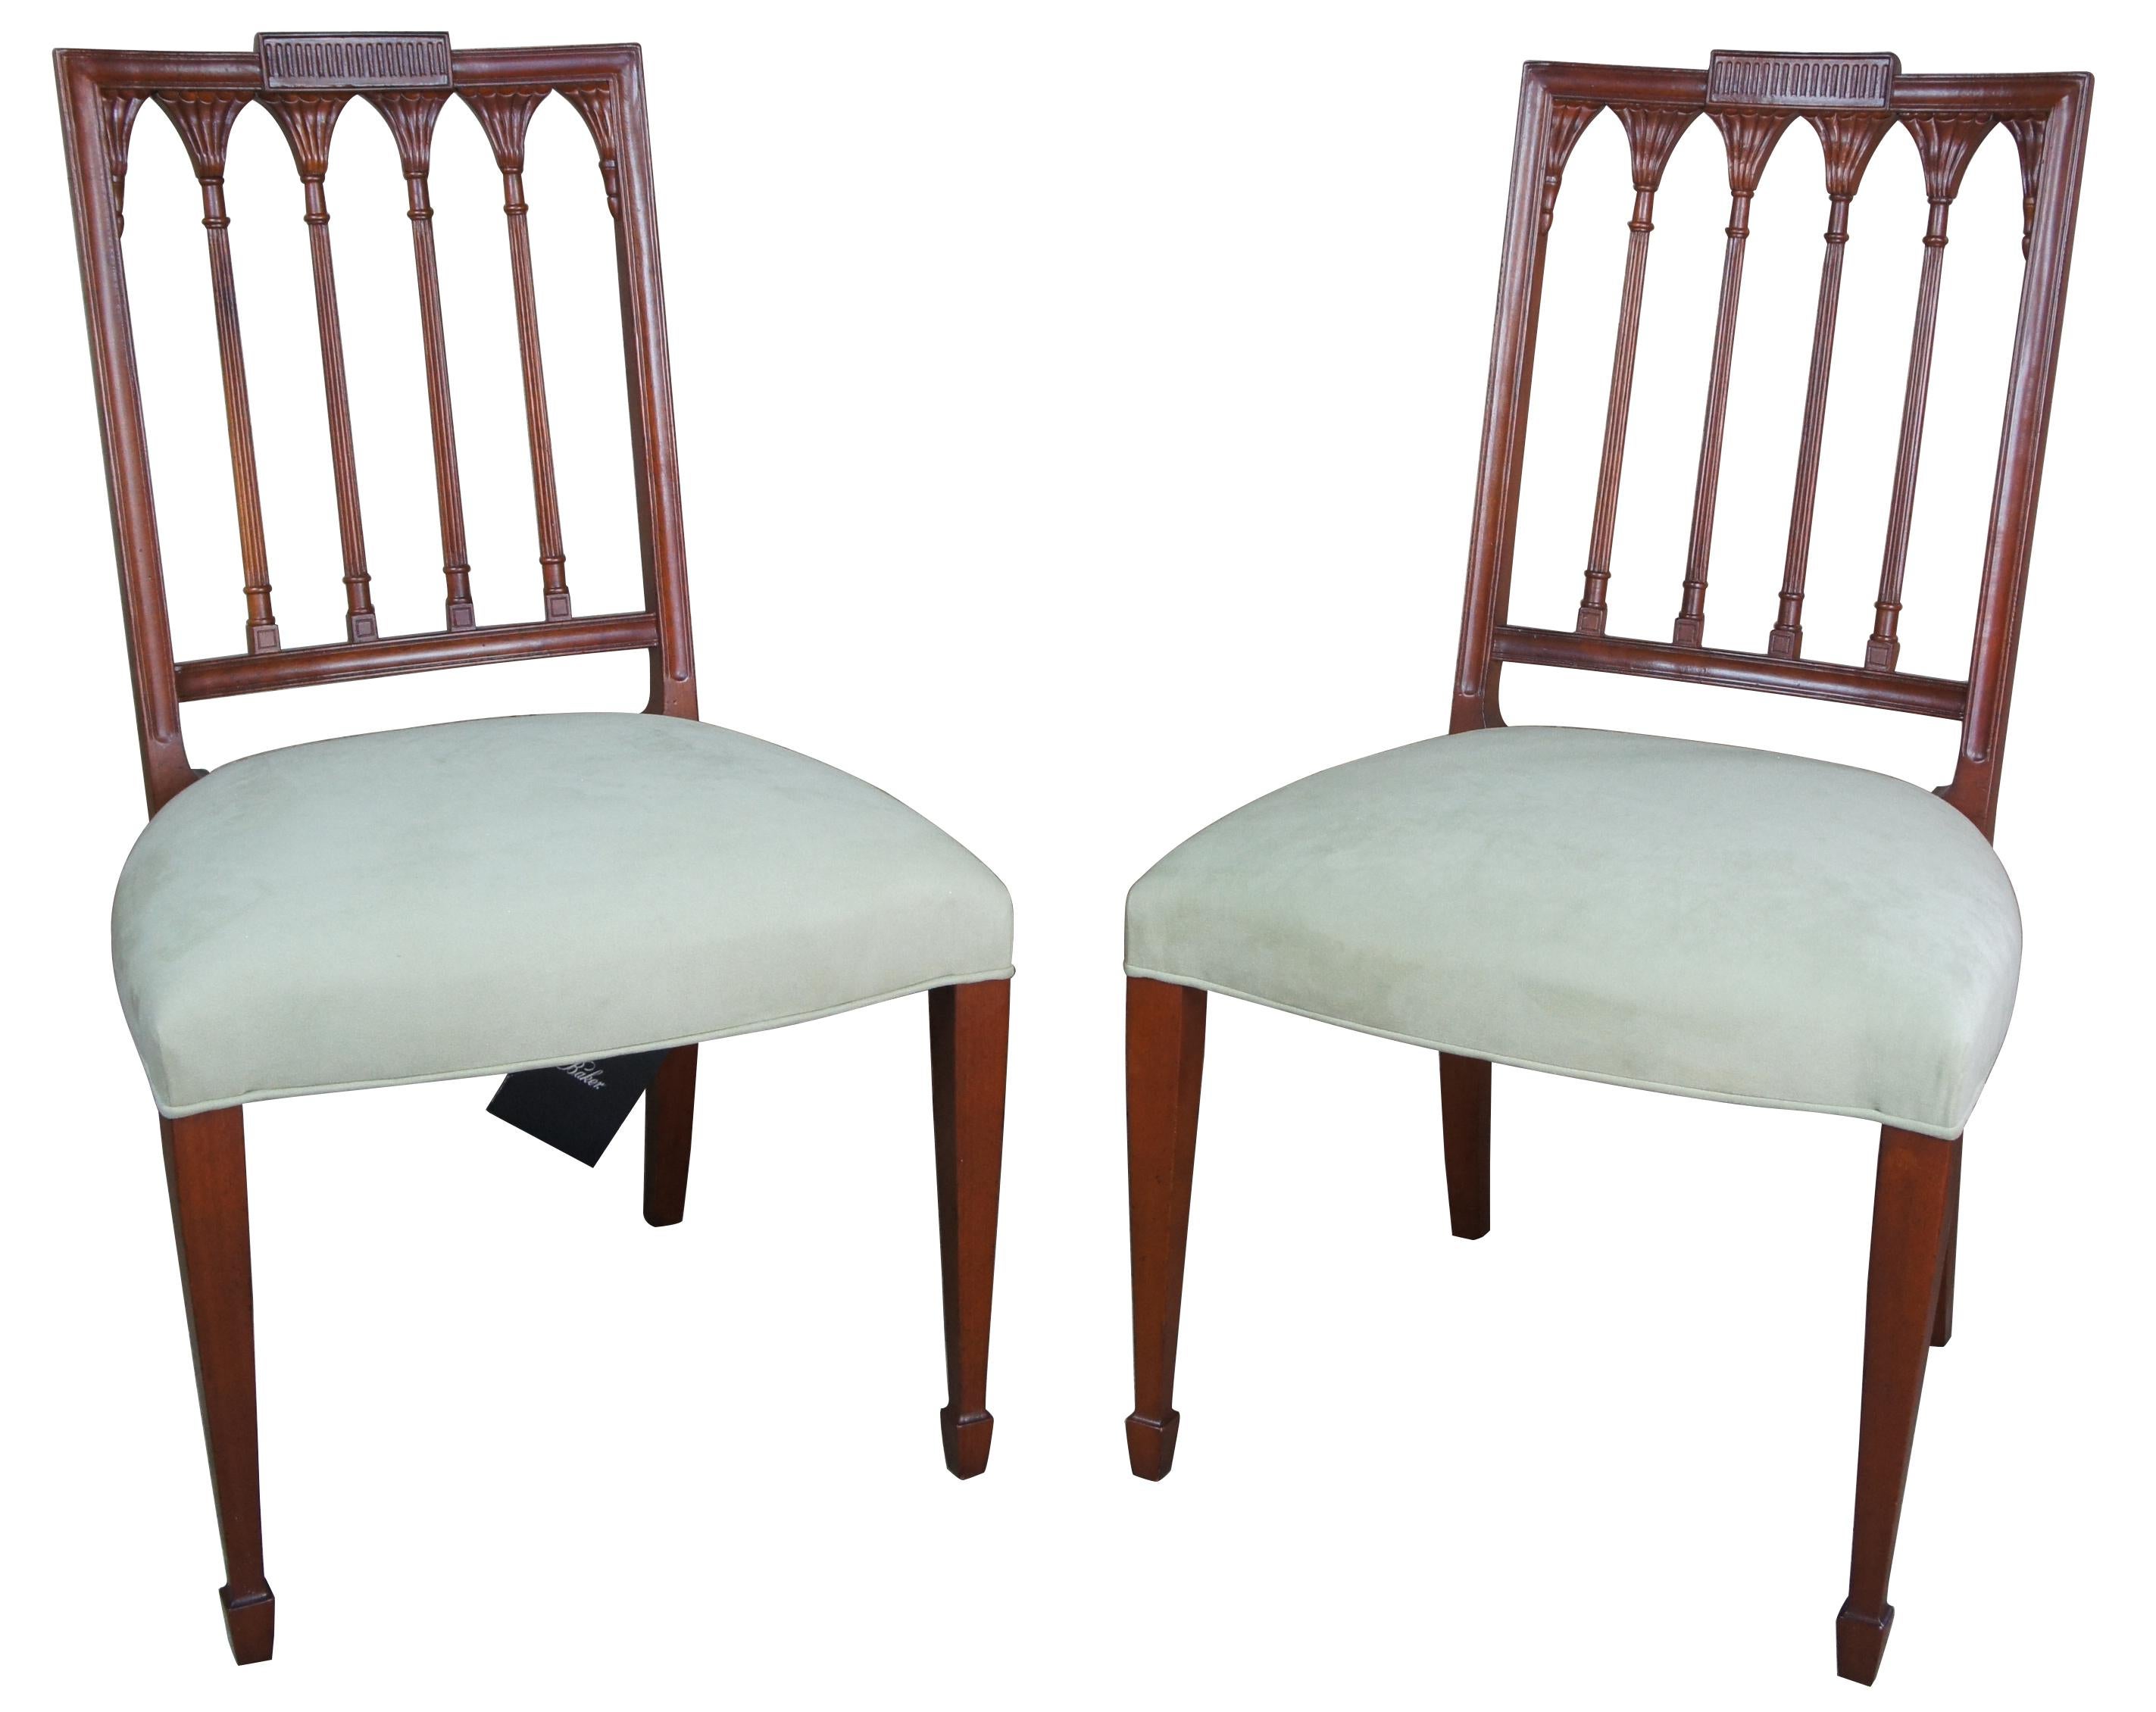 historic chairs